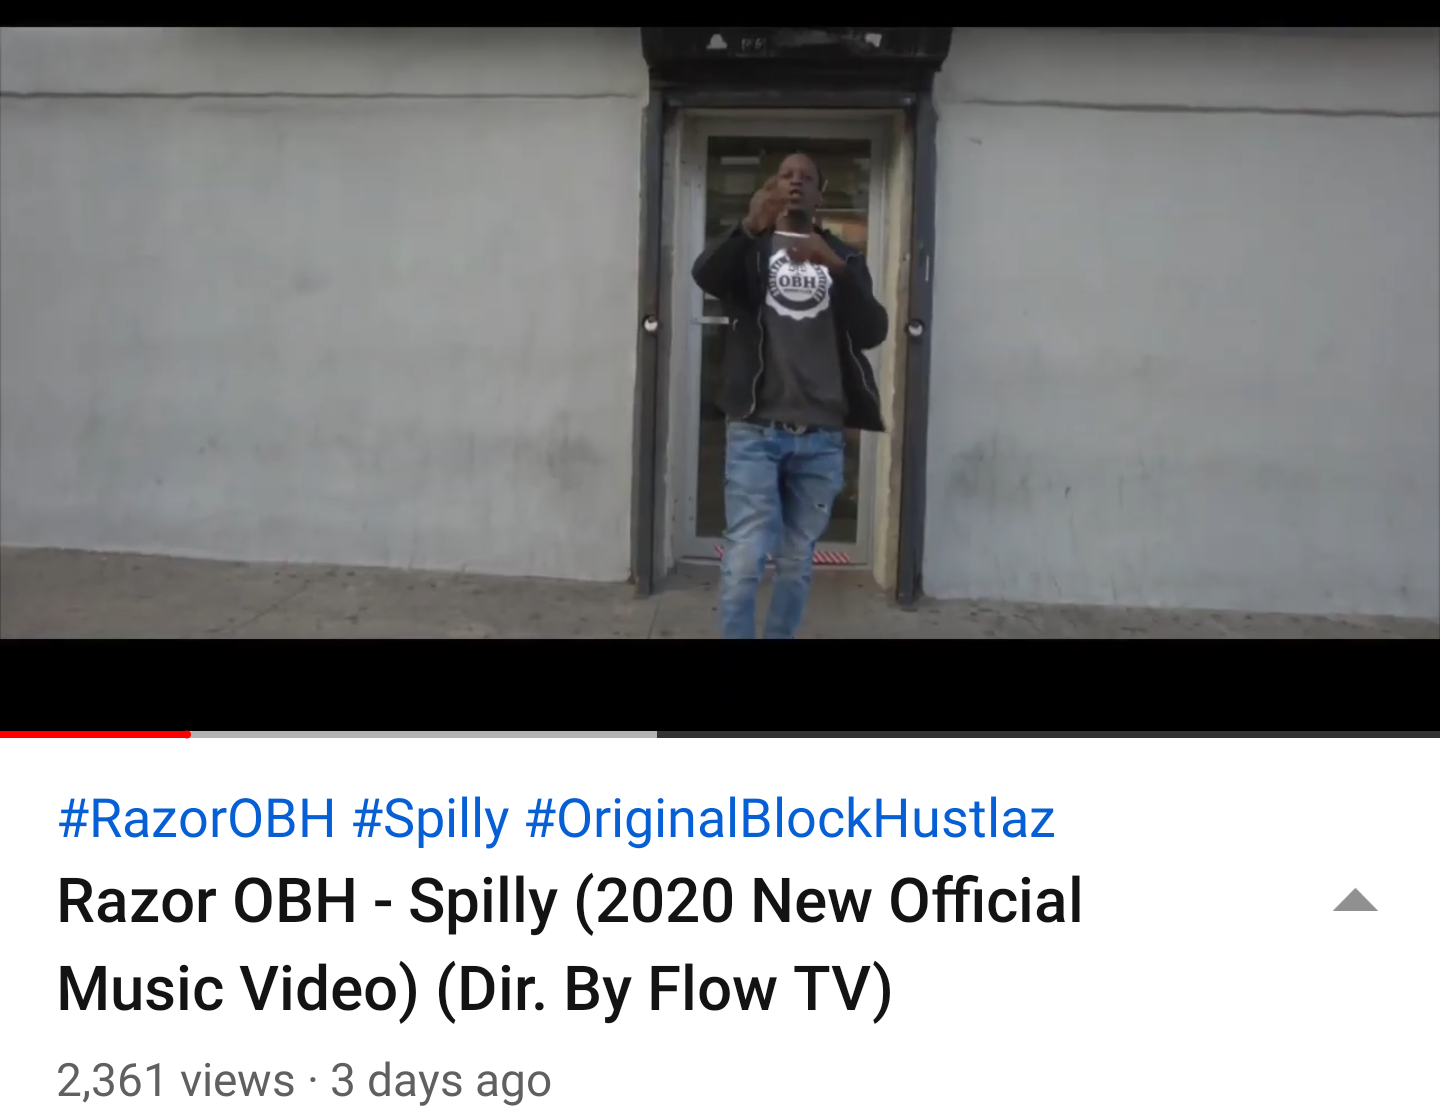 Razor OBH – Spilly (2020 New Official Music Video) (Dir. By Flow TV)